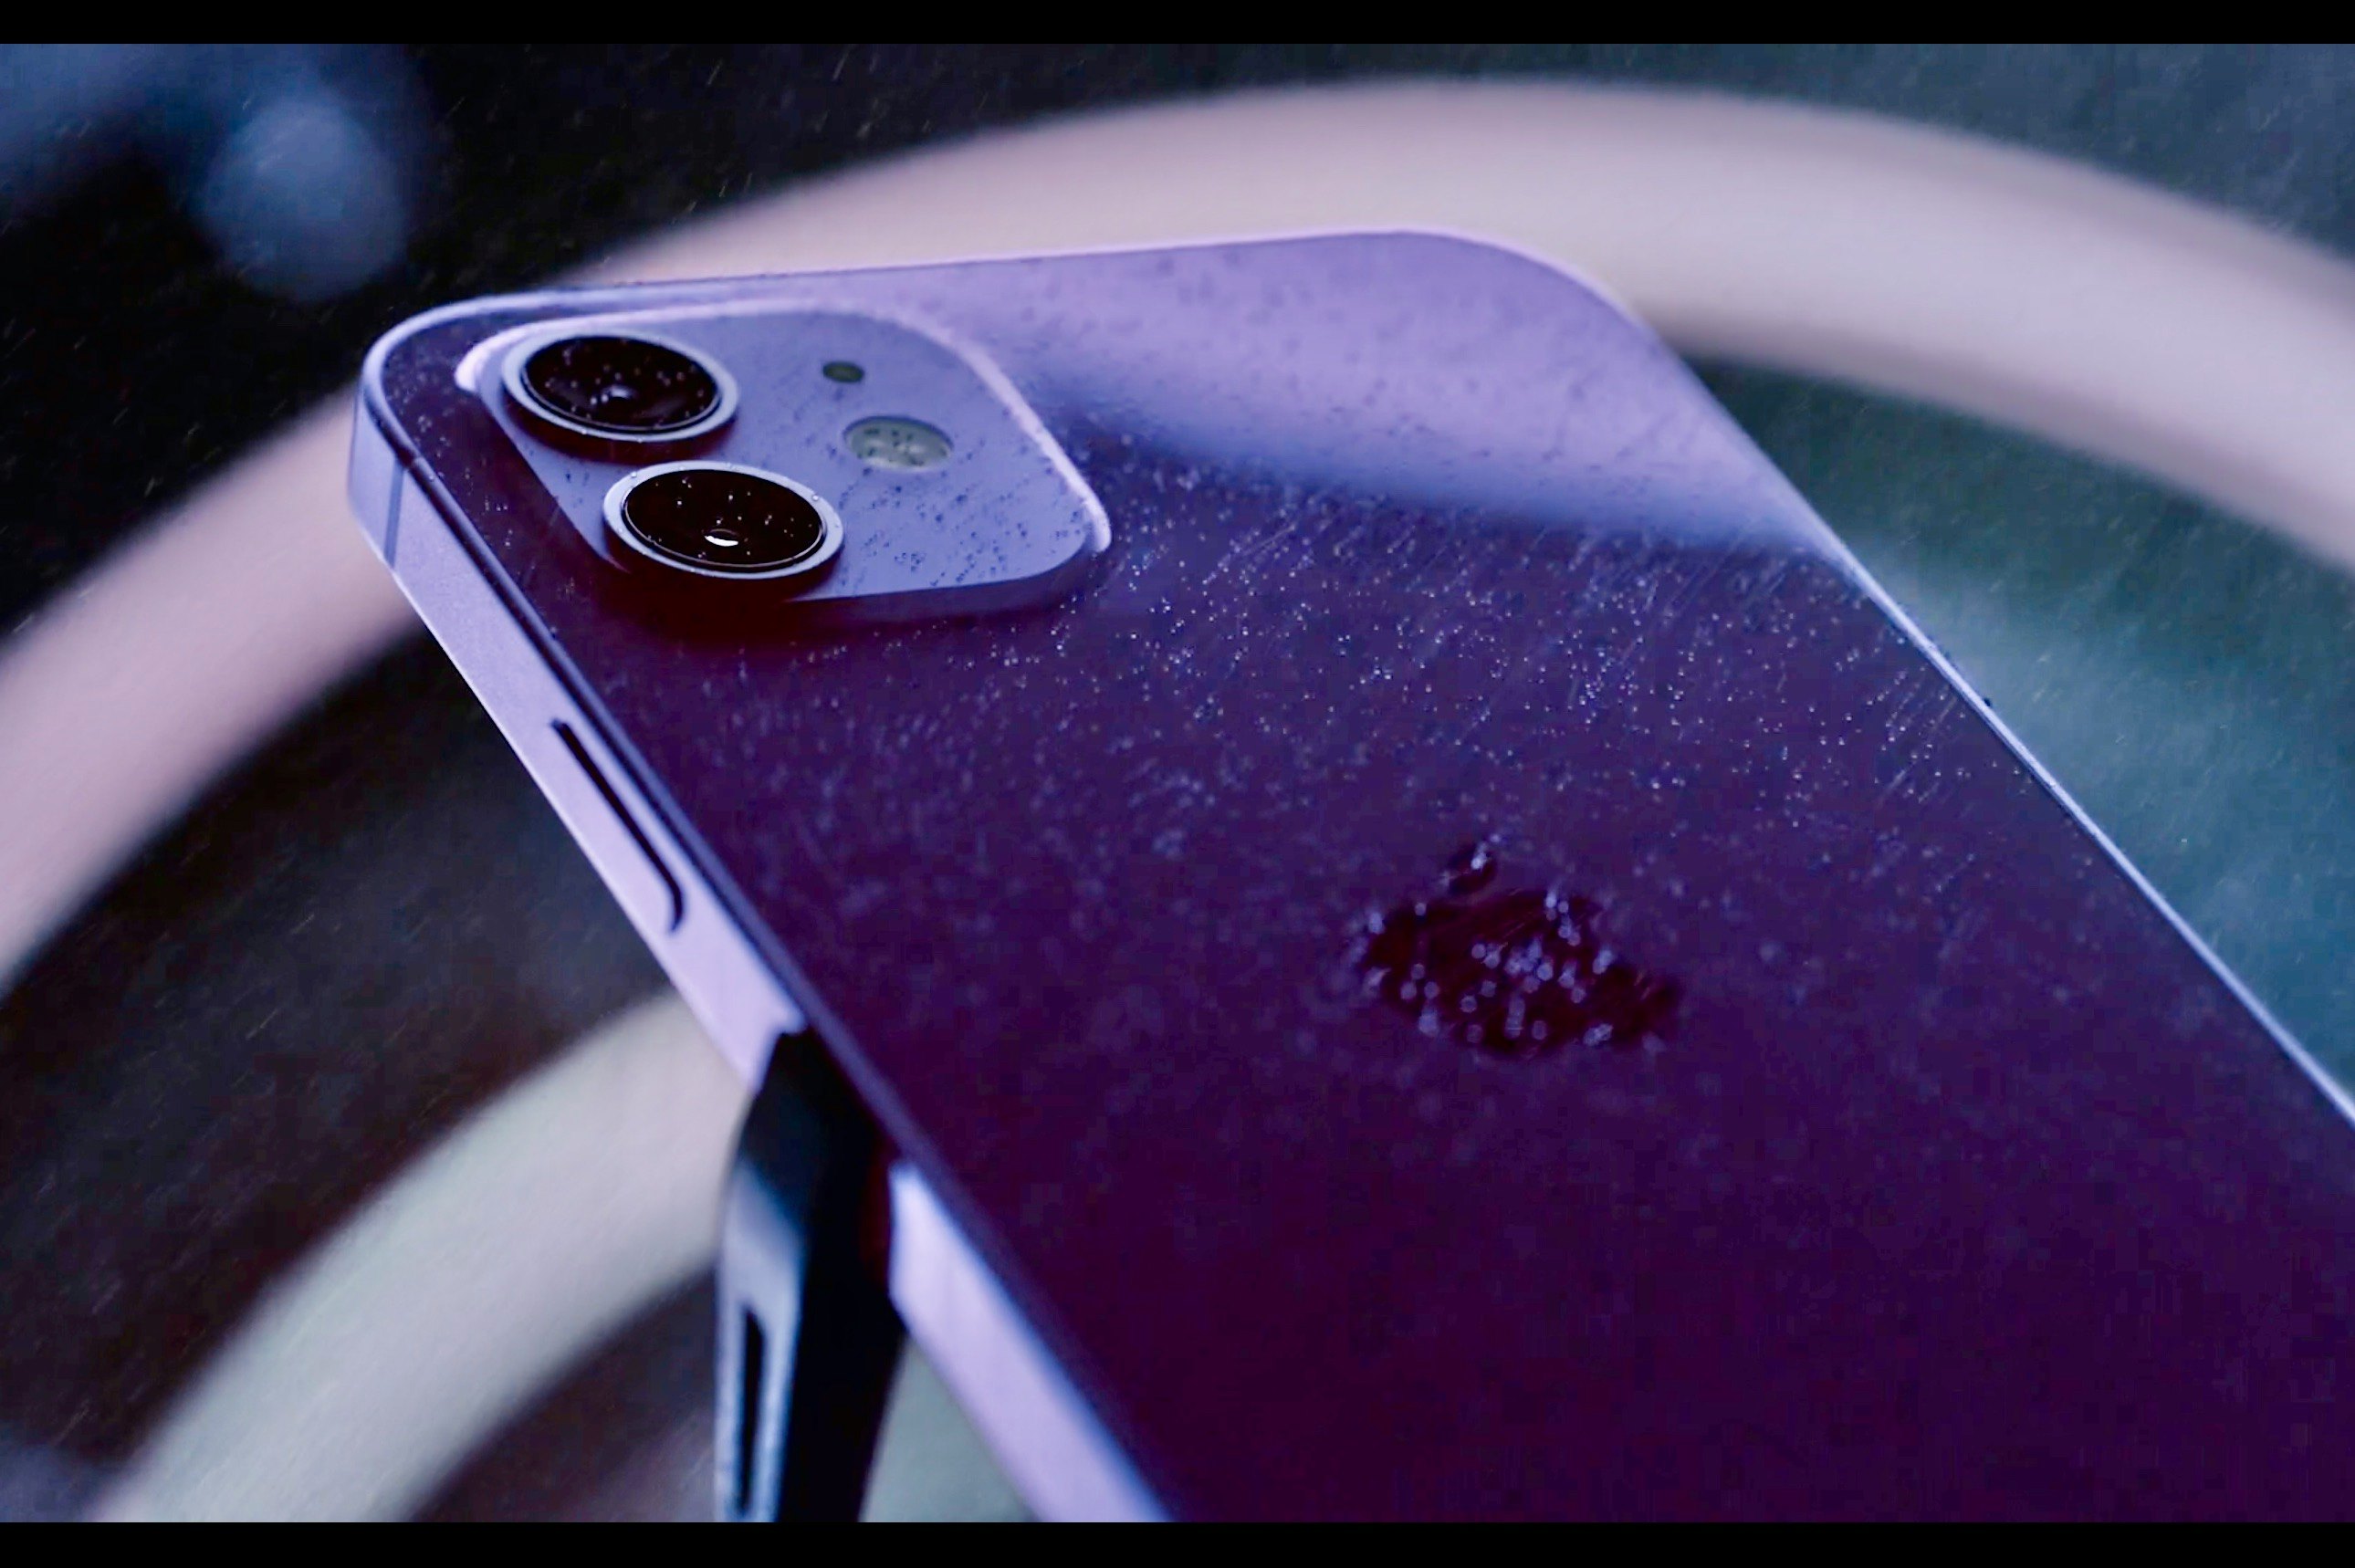 Apple S Purple Iphone 12 Release Date Means The New Color Is Coming So Soon Laptrinhx